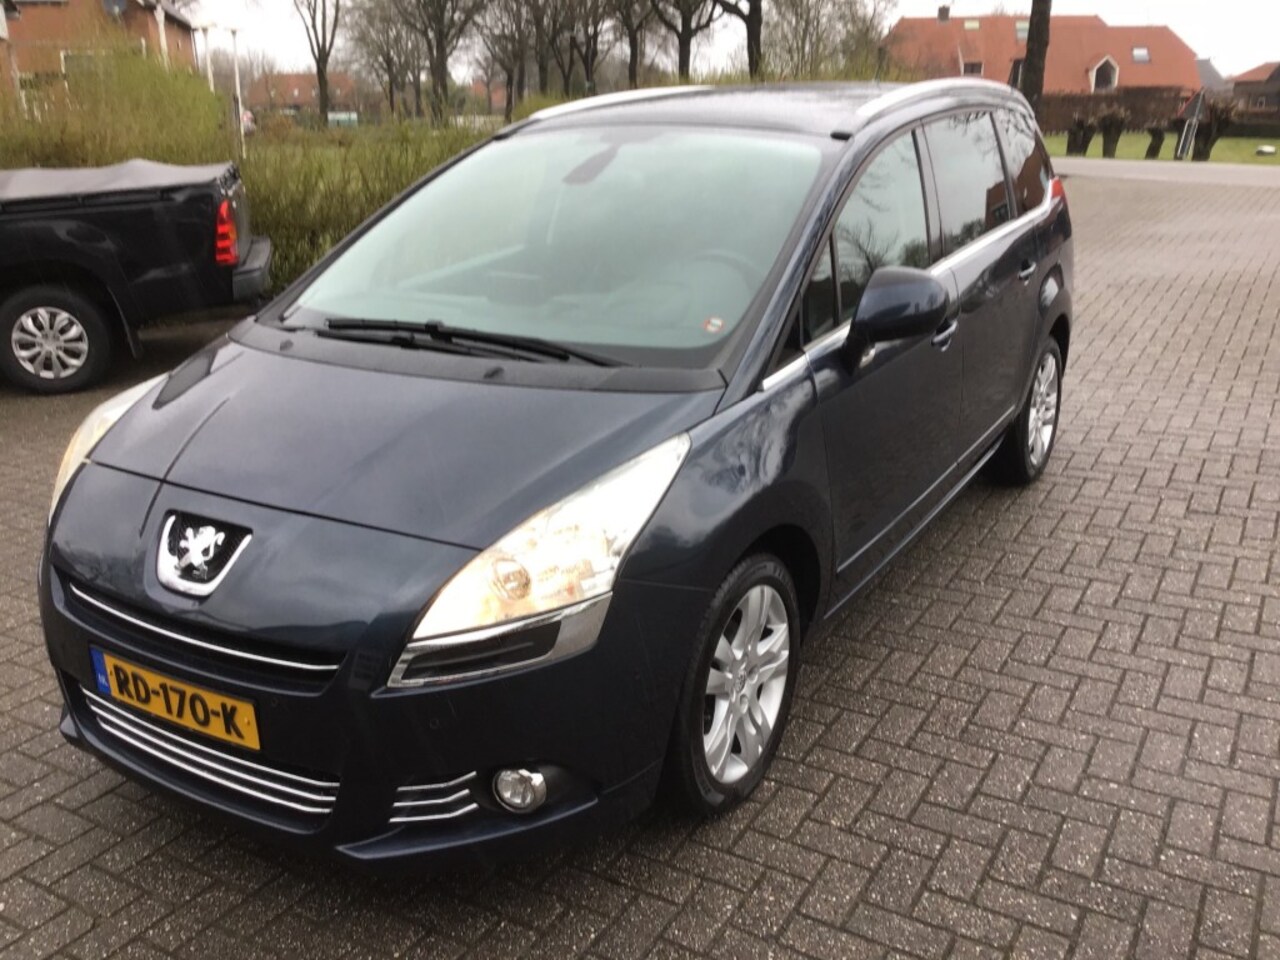 Peugeot 5008 - 1.6 HDi Active 5p. 1.6 HDI ACTIVE 5P. - AutoWereld.nl